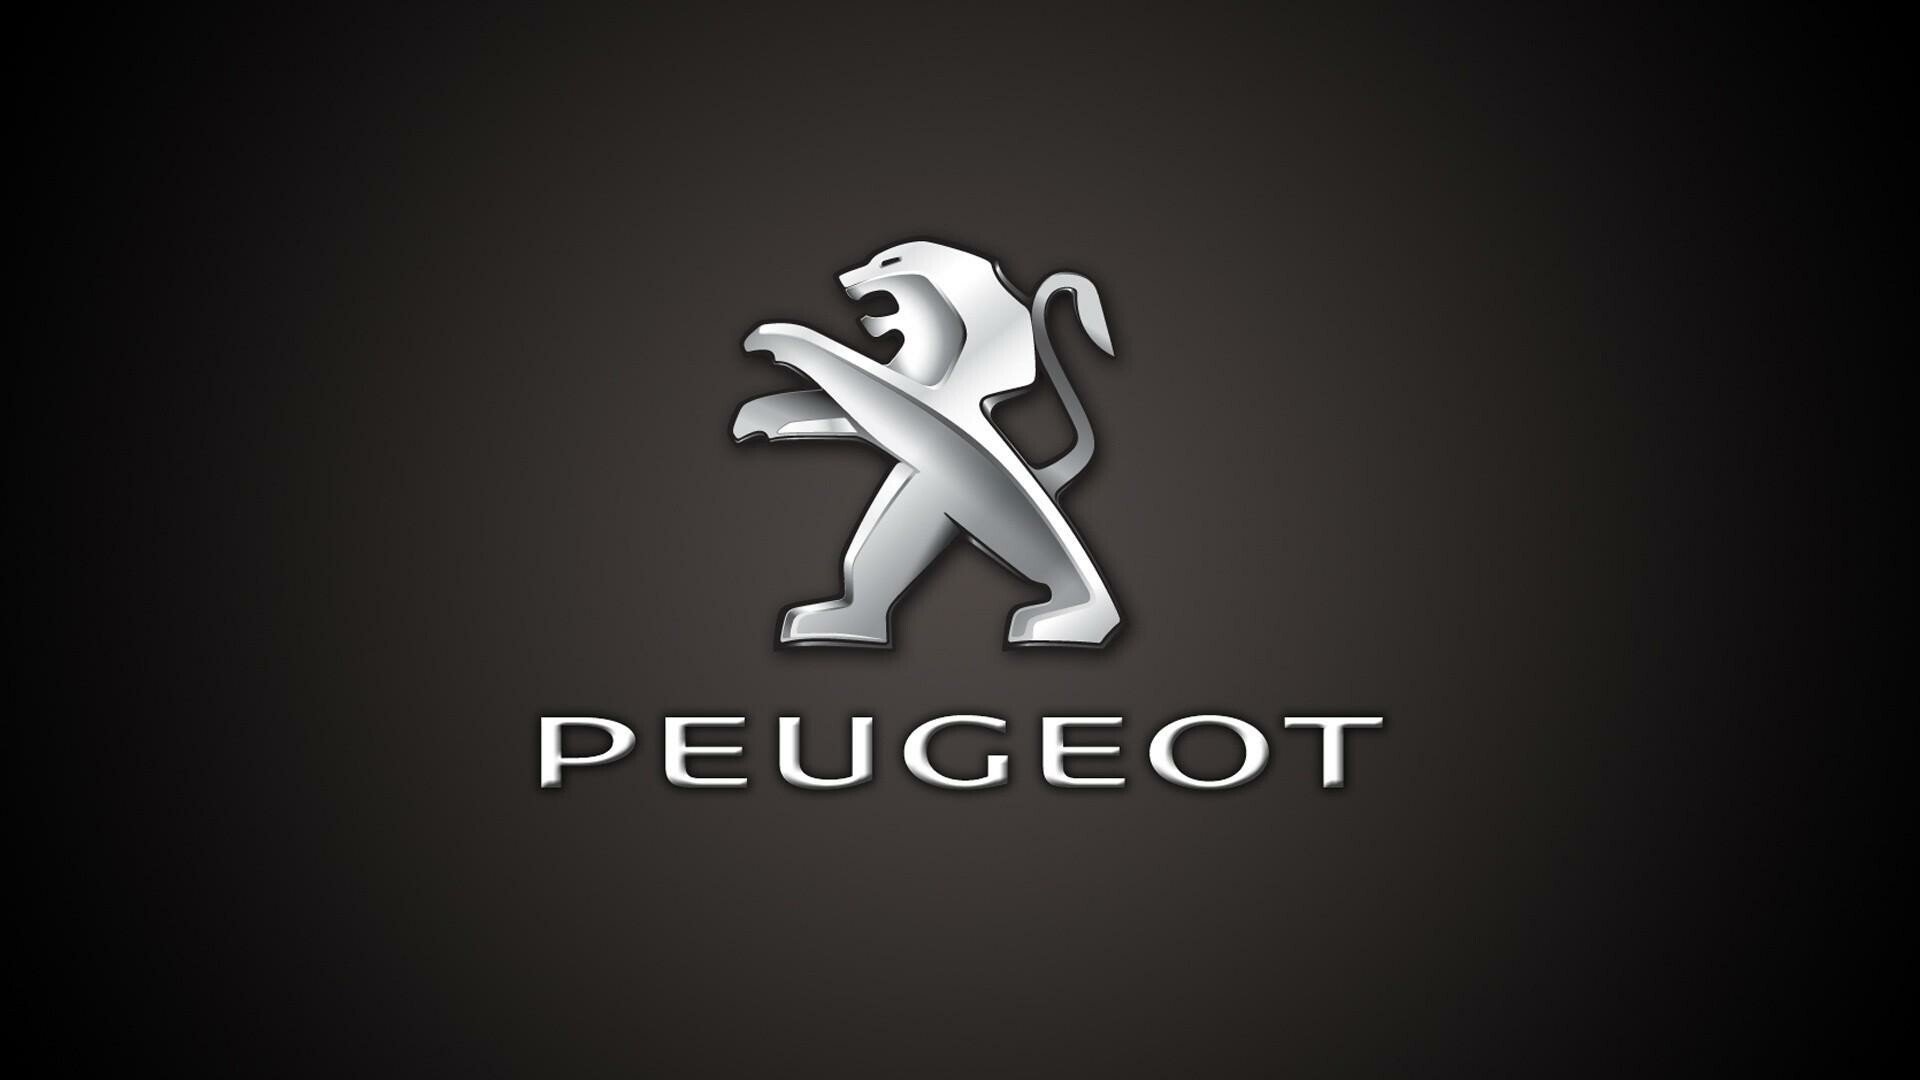 Peugeot: French company, produced two Car of the Year award winners in Ireland. 1920x1080 Full HD Wallpaper.